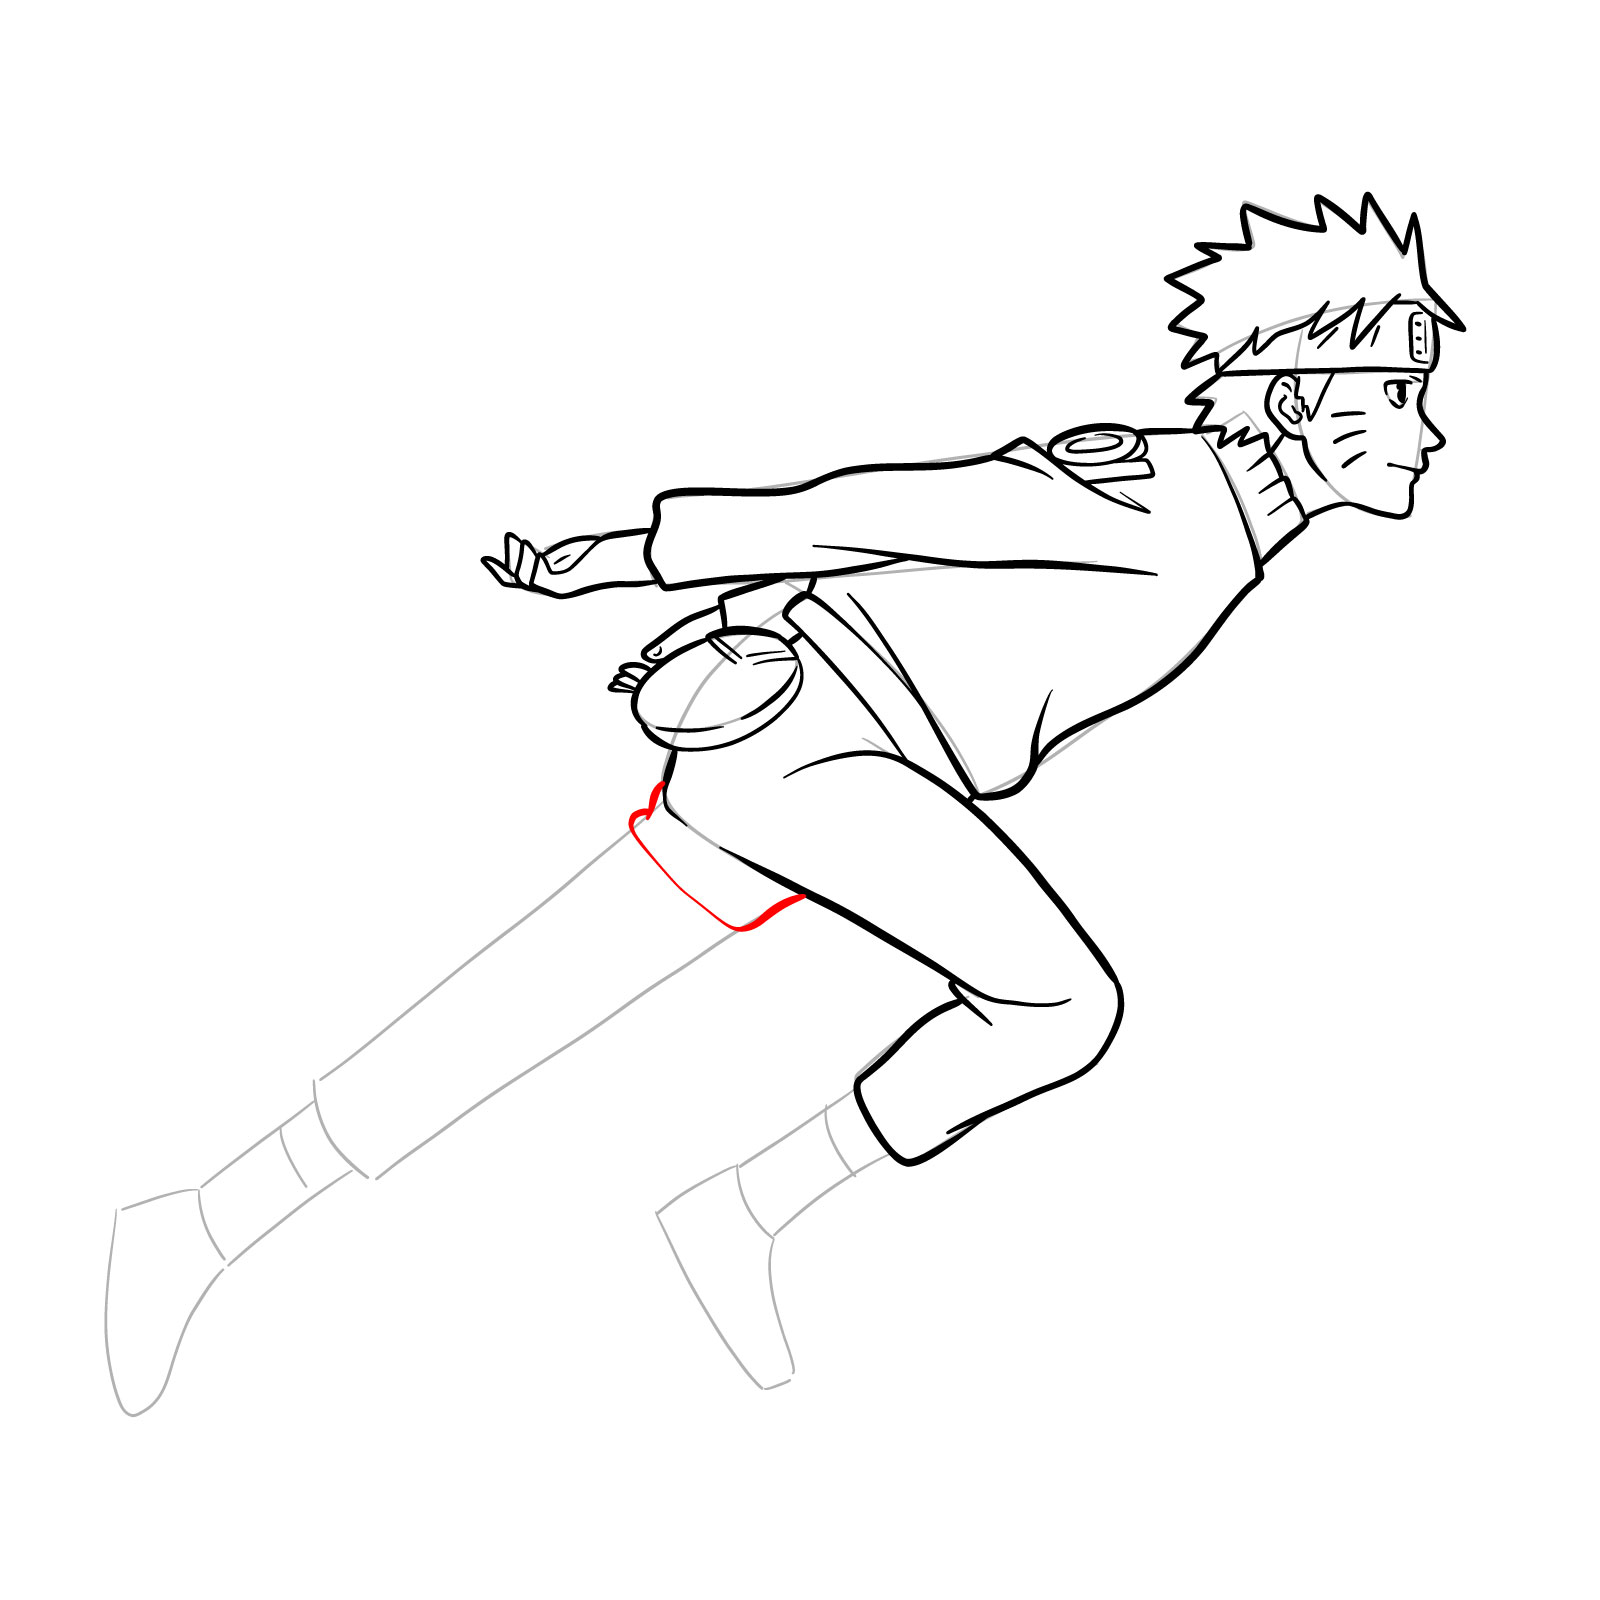 How to draw Naruto running - step 29